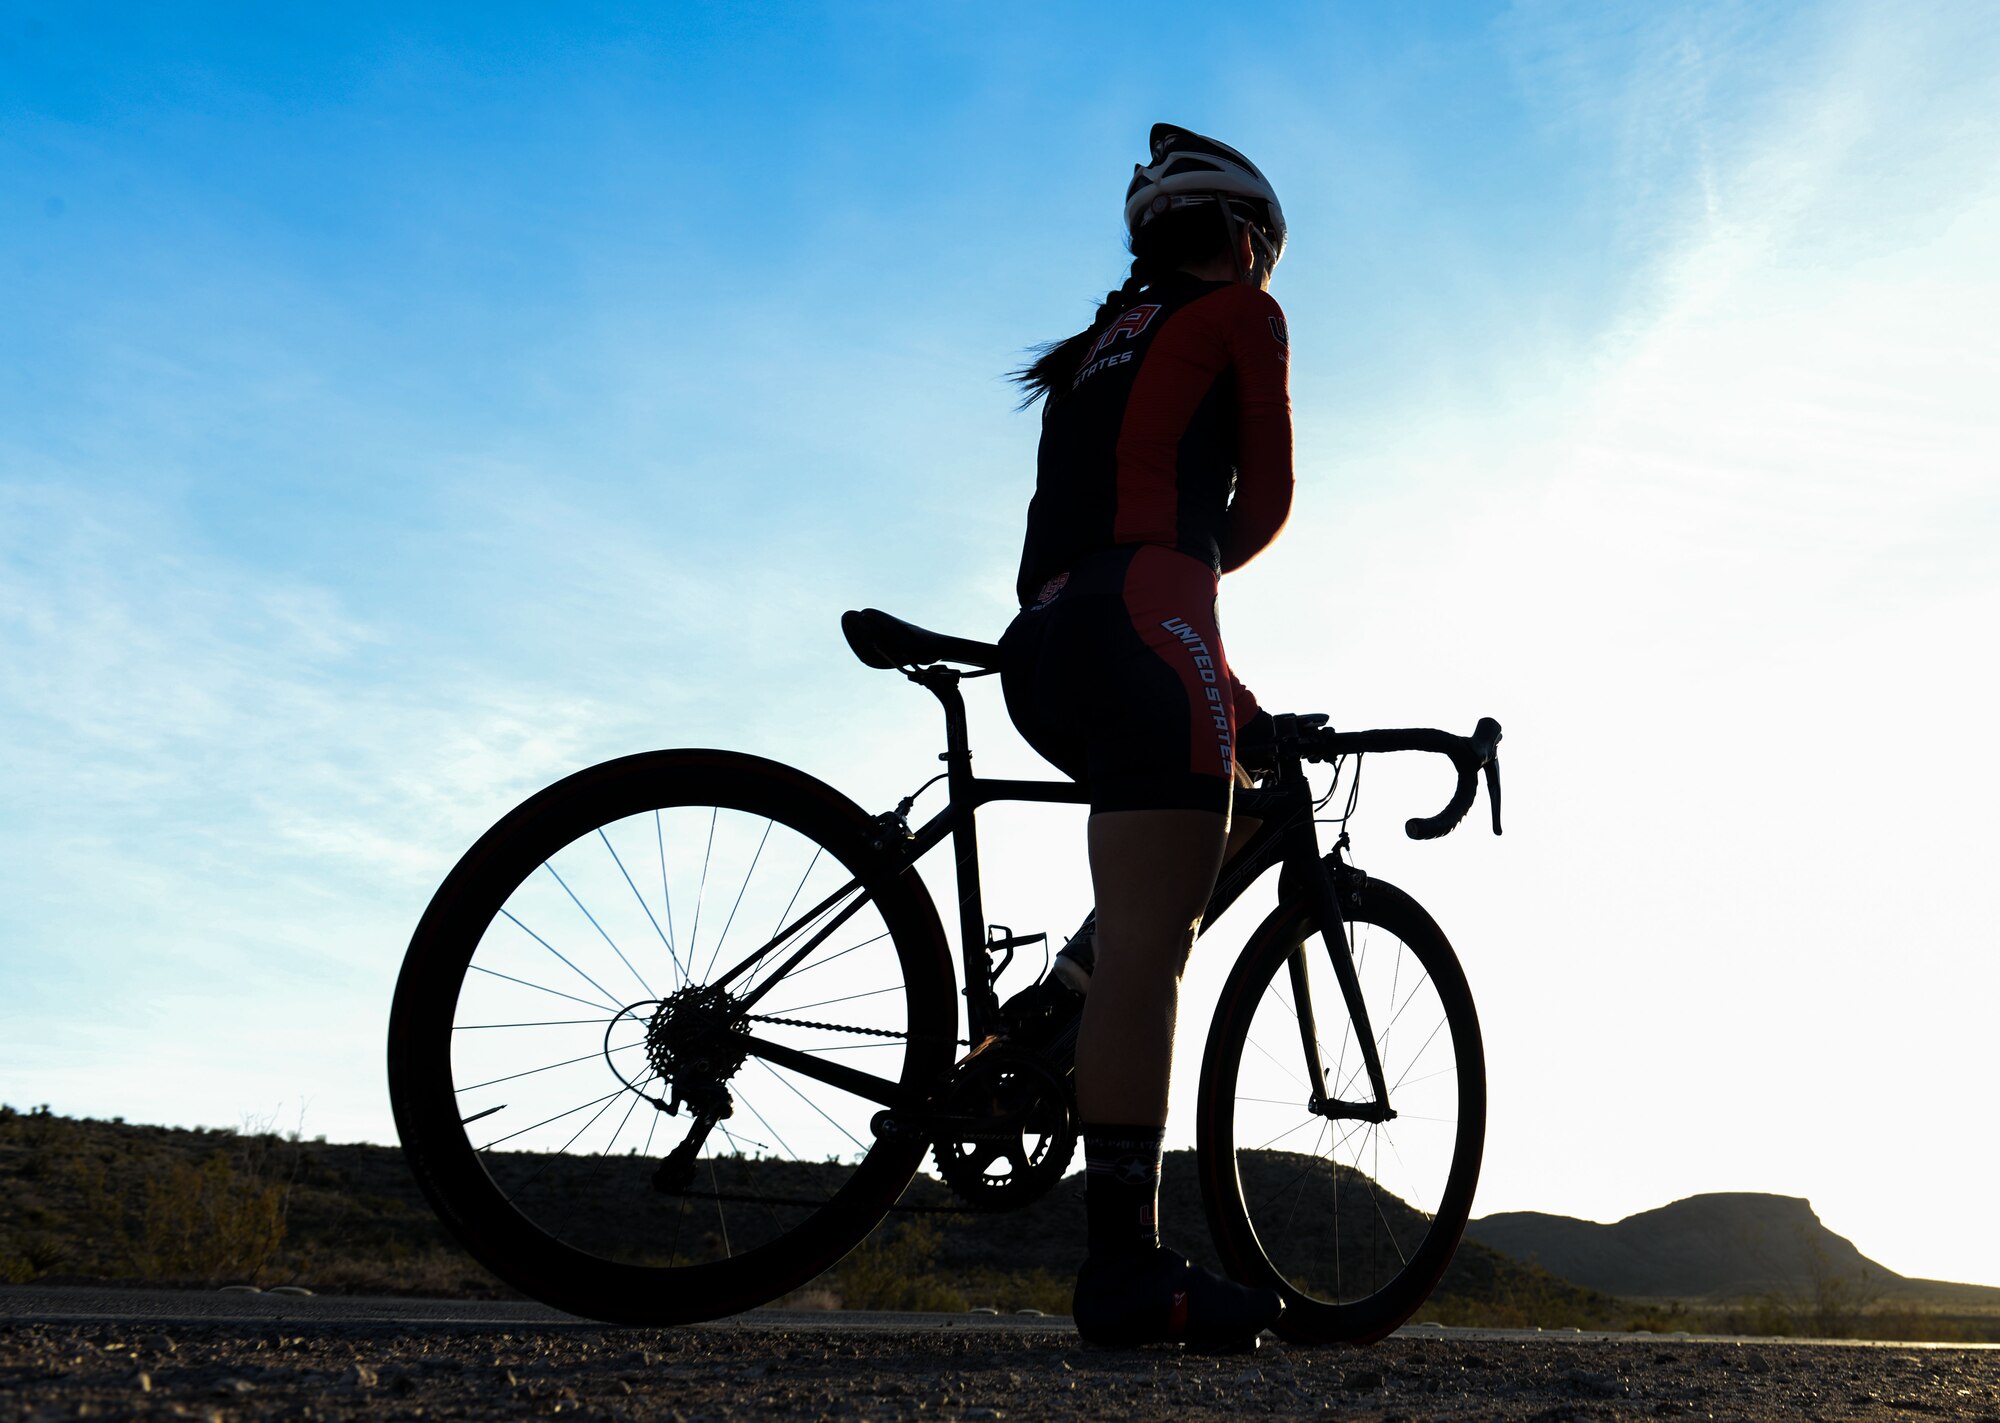 (Maj.) Dr. Shannon Gaffney, 99th Medical Group staff radiologist, prepares for a bike ride through the Calico Basin in Las Vegas, Nov. 18, 2015. Gaffney participated in the 2015 Military World Games. Much like the Olympics for military members, the competition features 100 countries competing in 26 sports divisions.  (U.S. Air Force photo by Airman 1st Class Rachel Loftis)